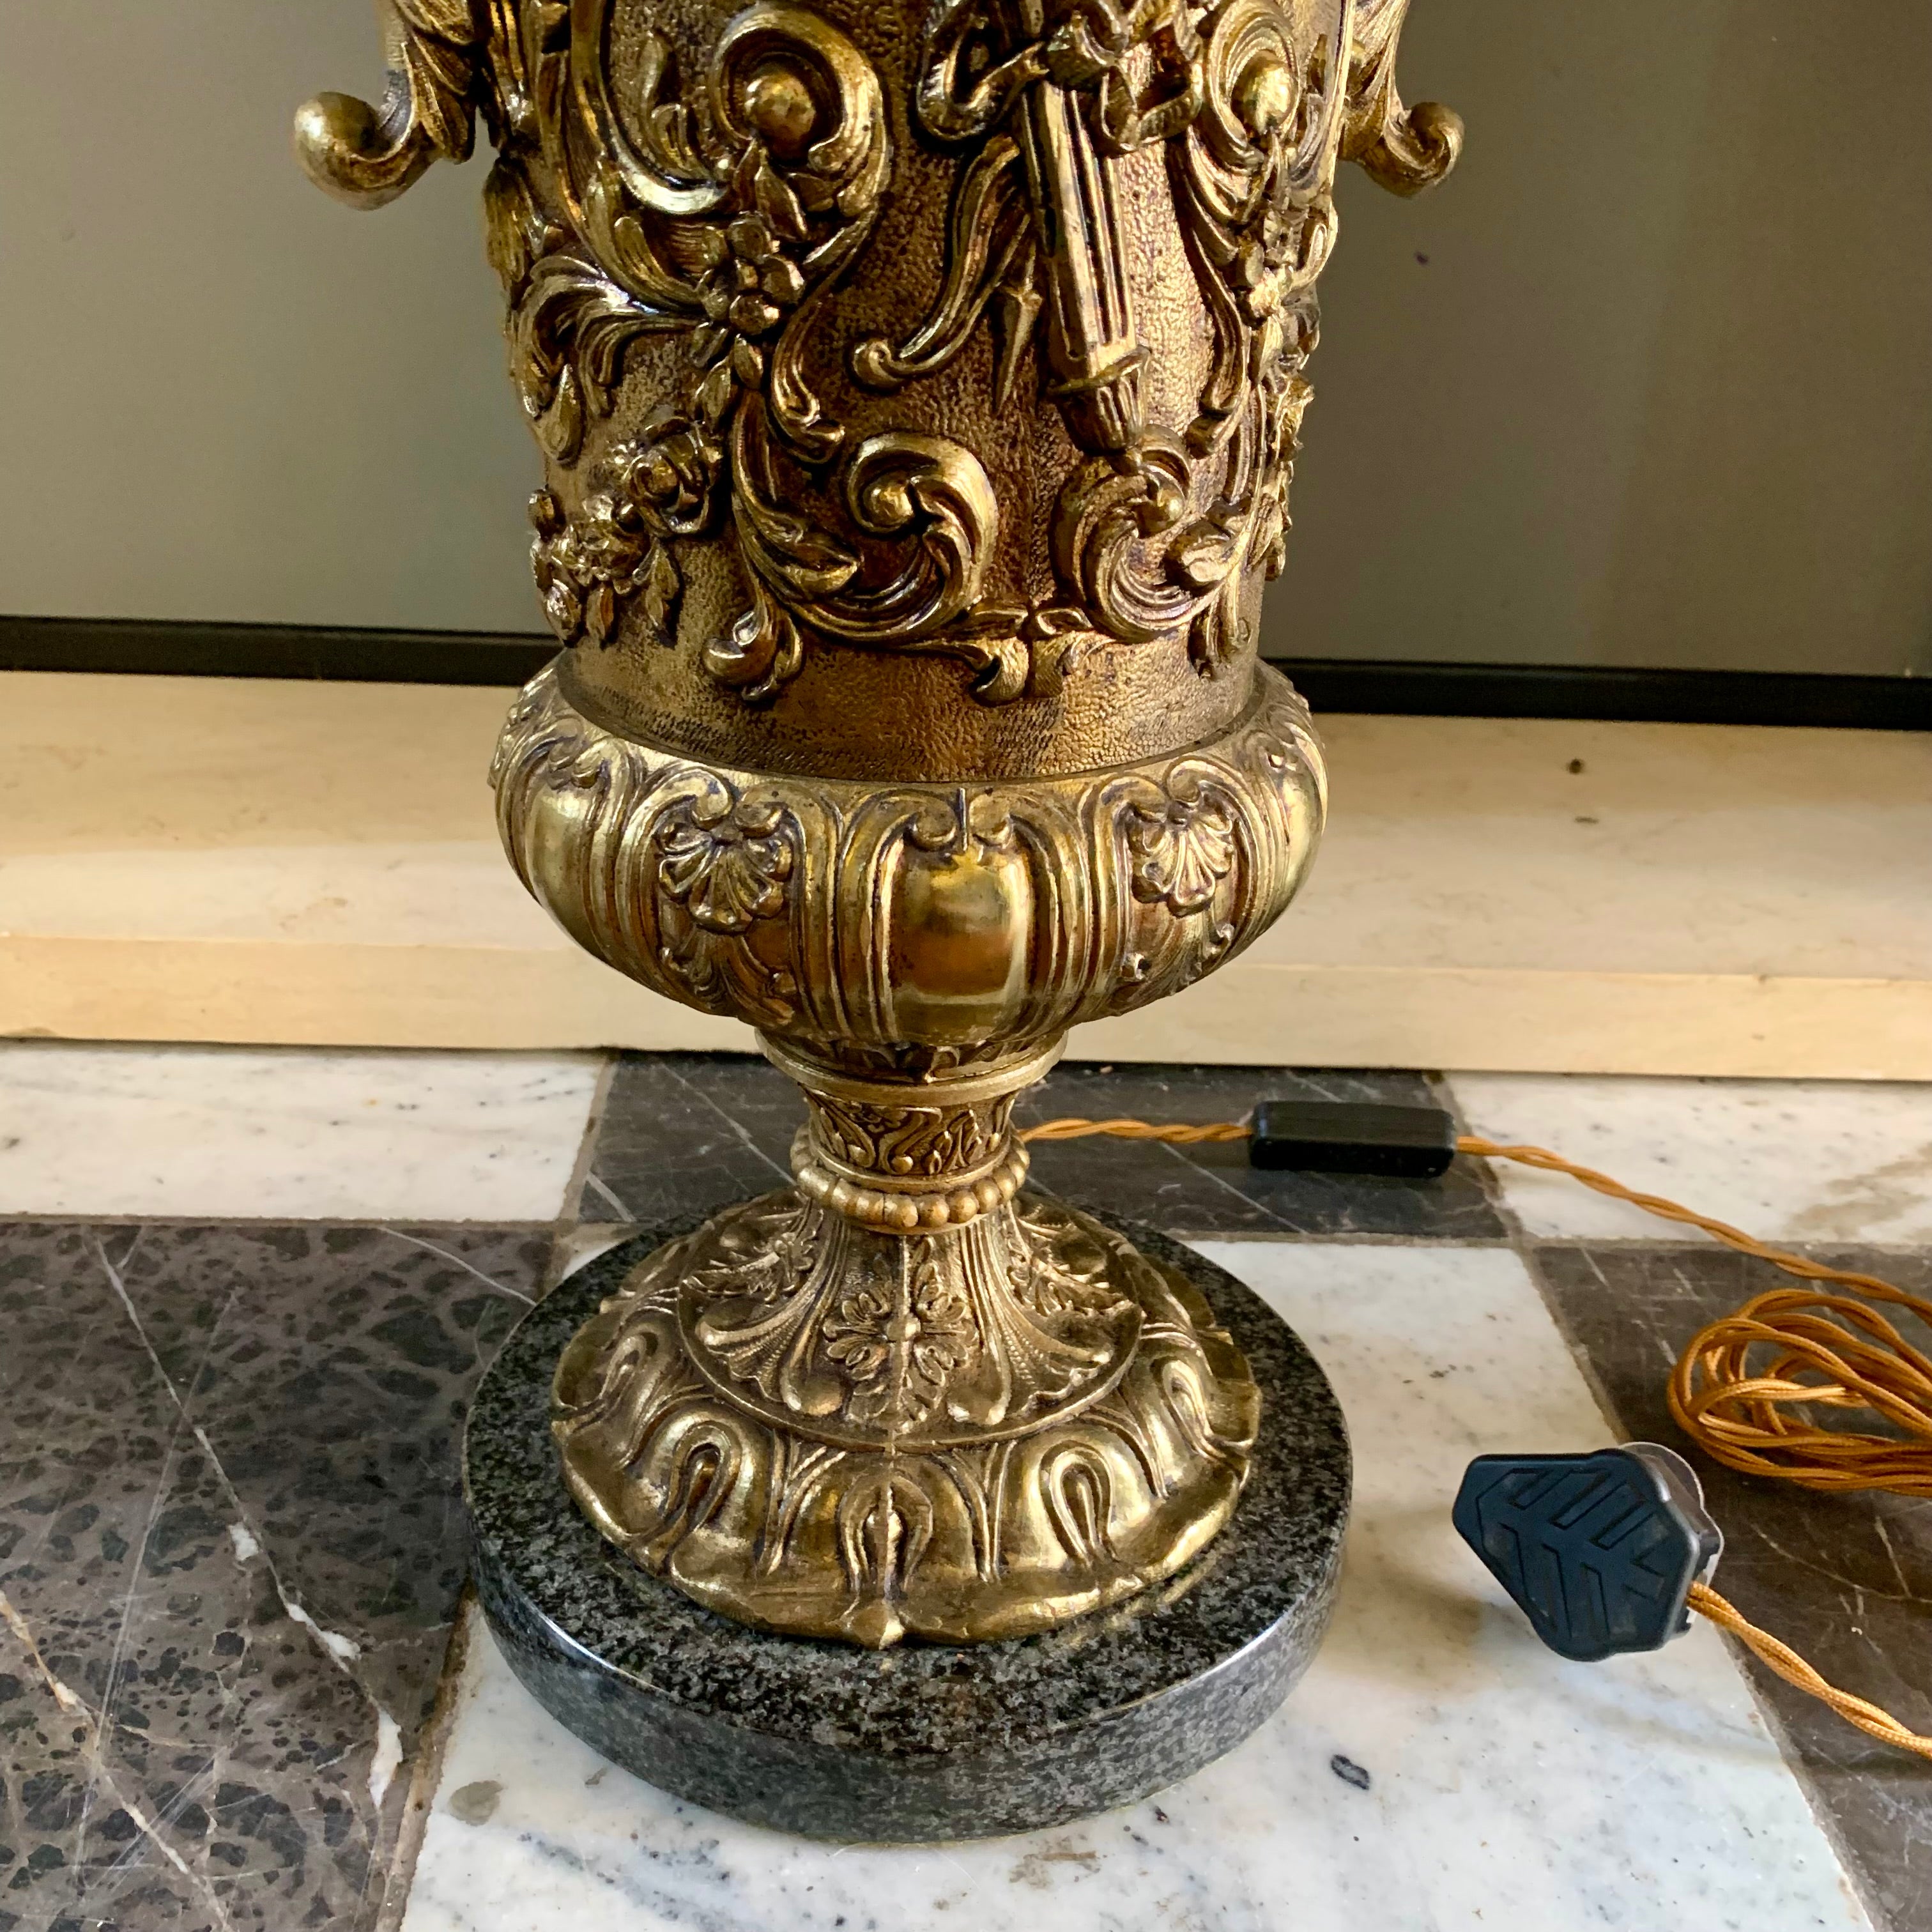 Large and Heavy Decorative Brass Table Lamp